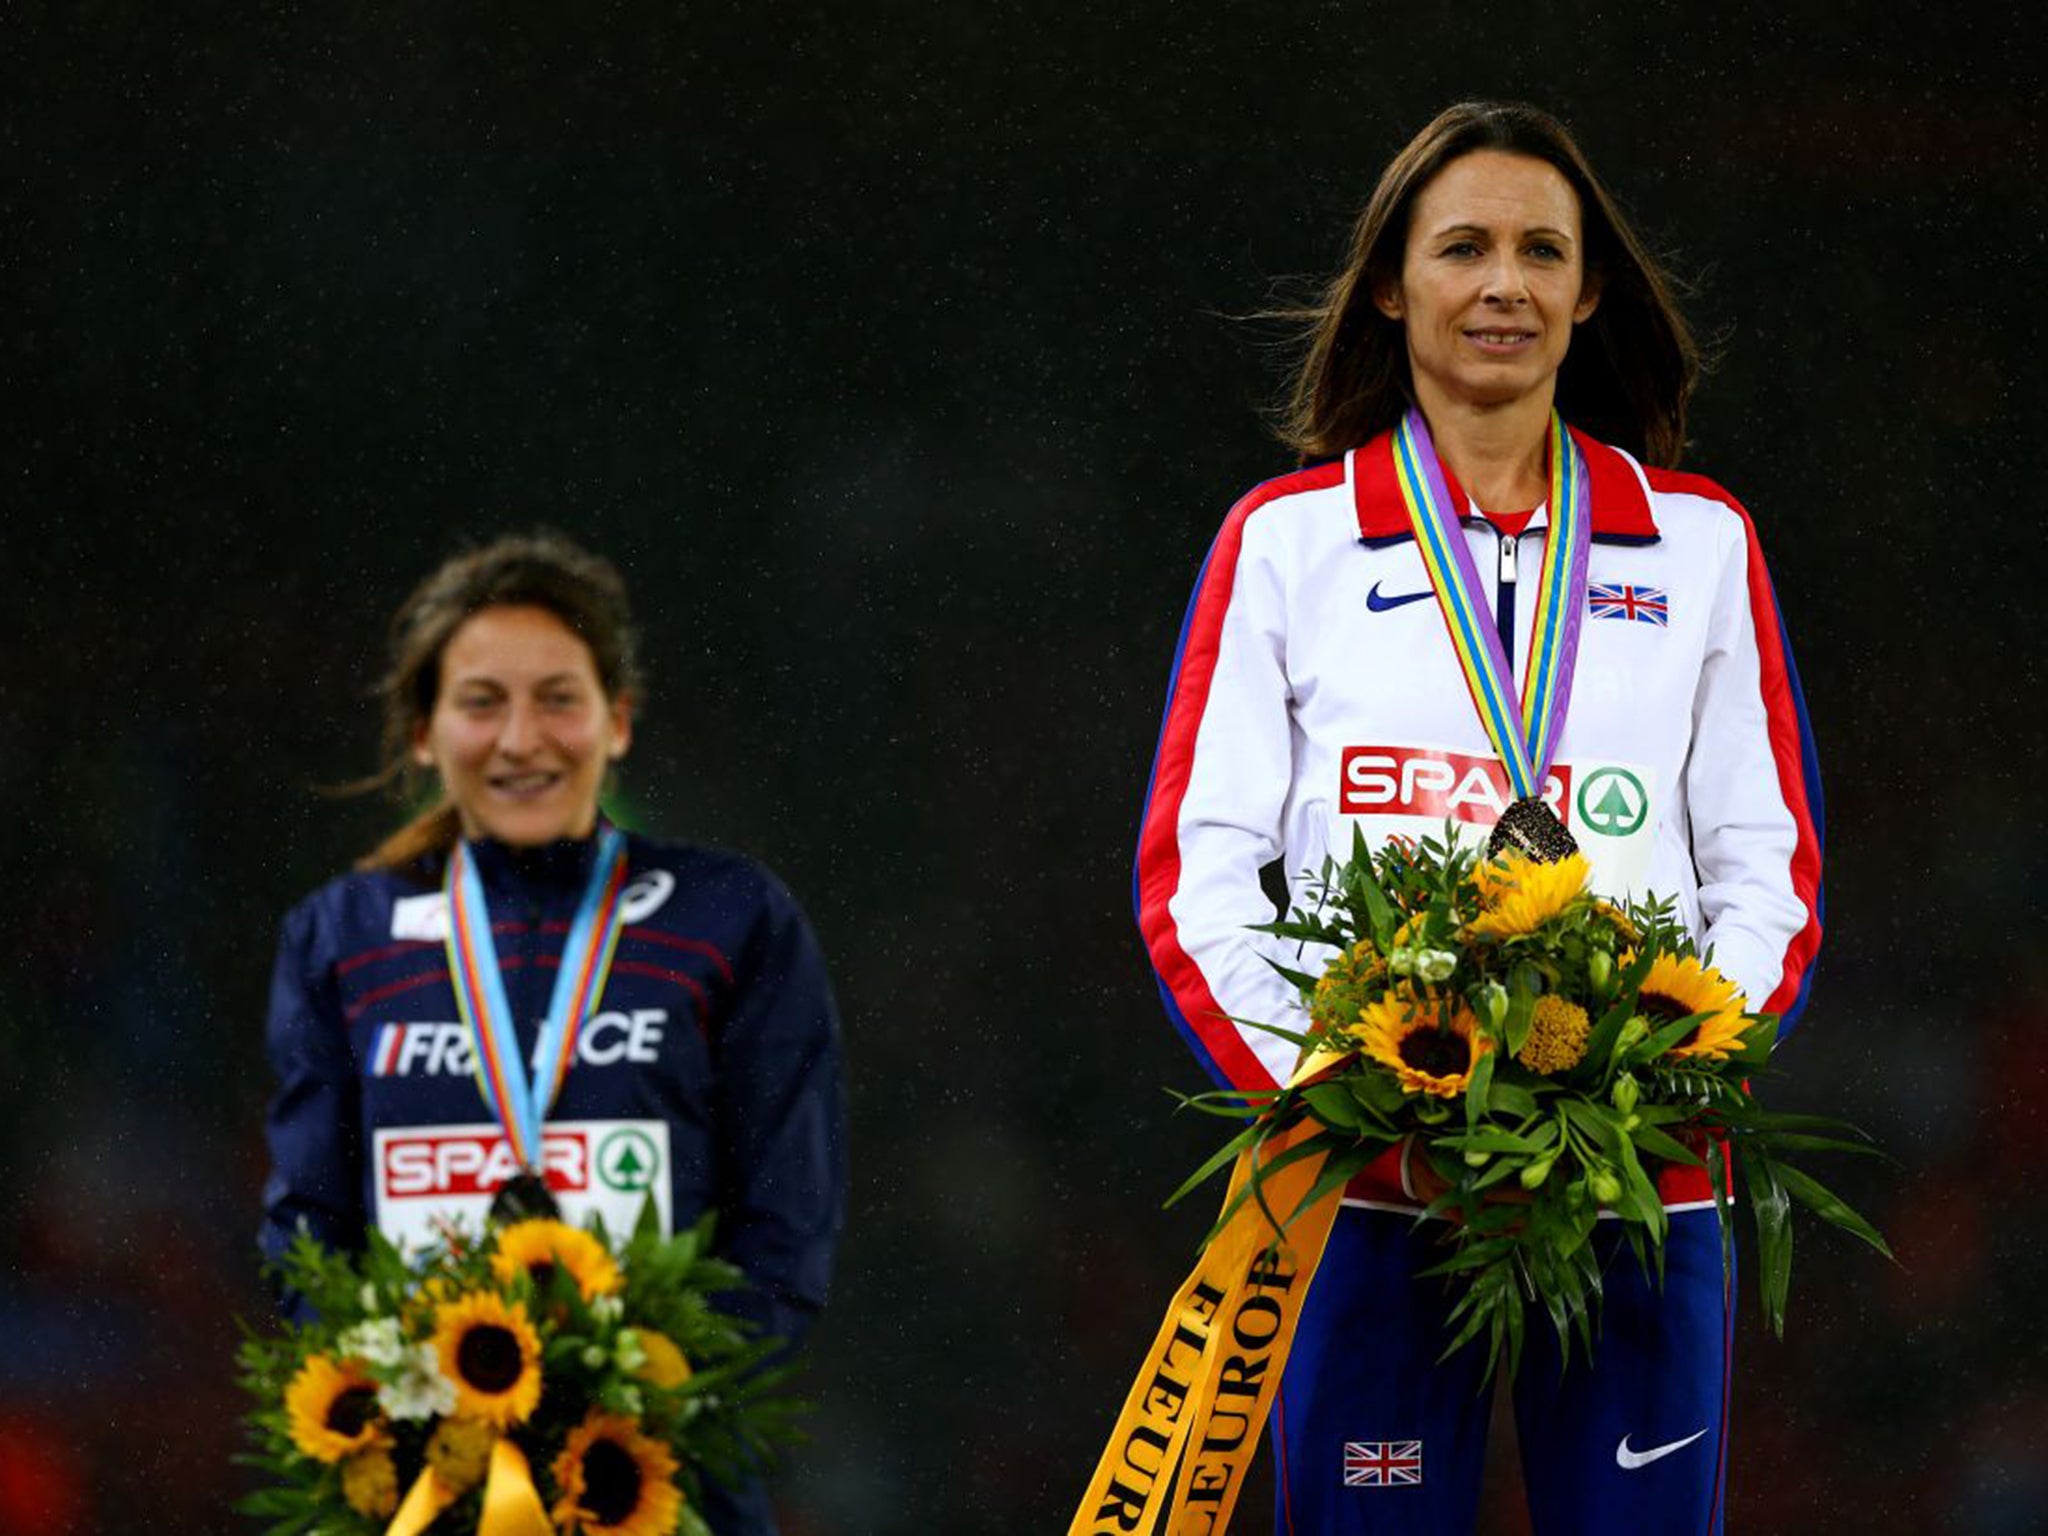 Distance runner Jo Pavey is vocally opposed to doping